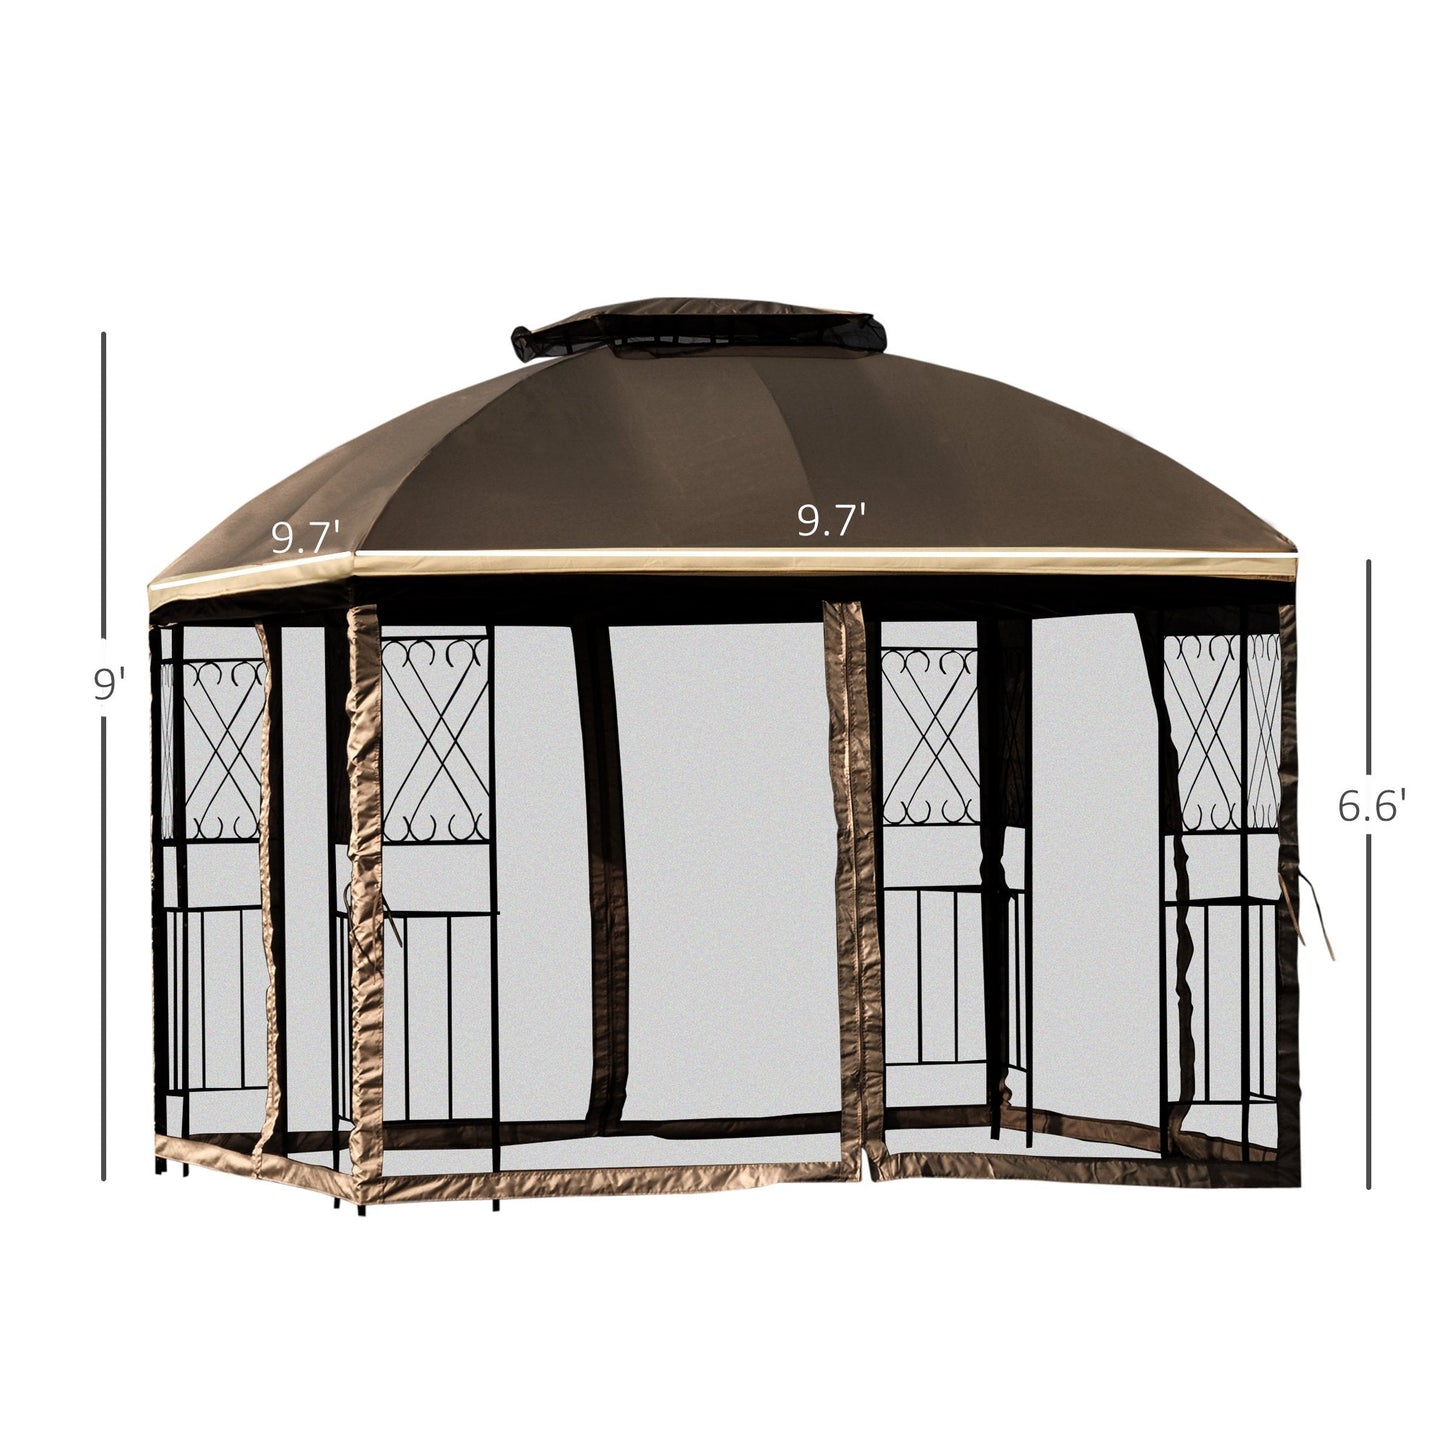 Outdoor and Garden-10' x 10' Patio Gazebo Canopy Outdoor Canopy Shelter with Double Tier Roof, Removable Mesh Netting, Display Shelves - Outdoor Style Company